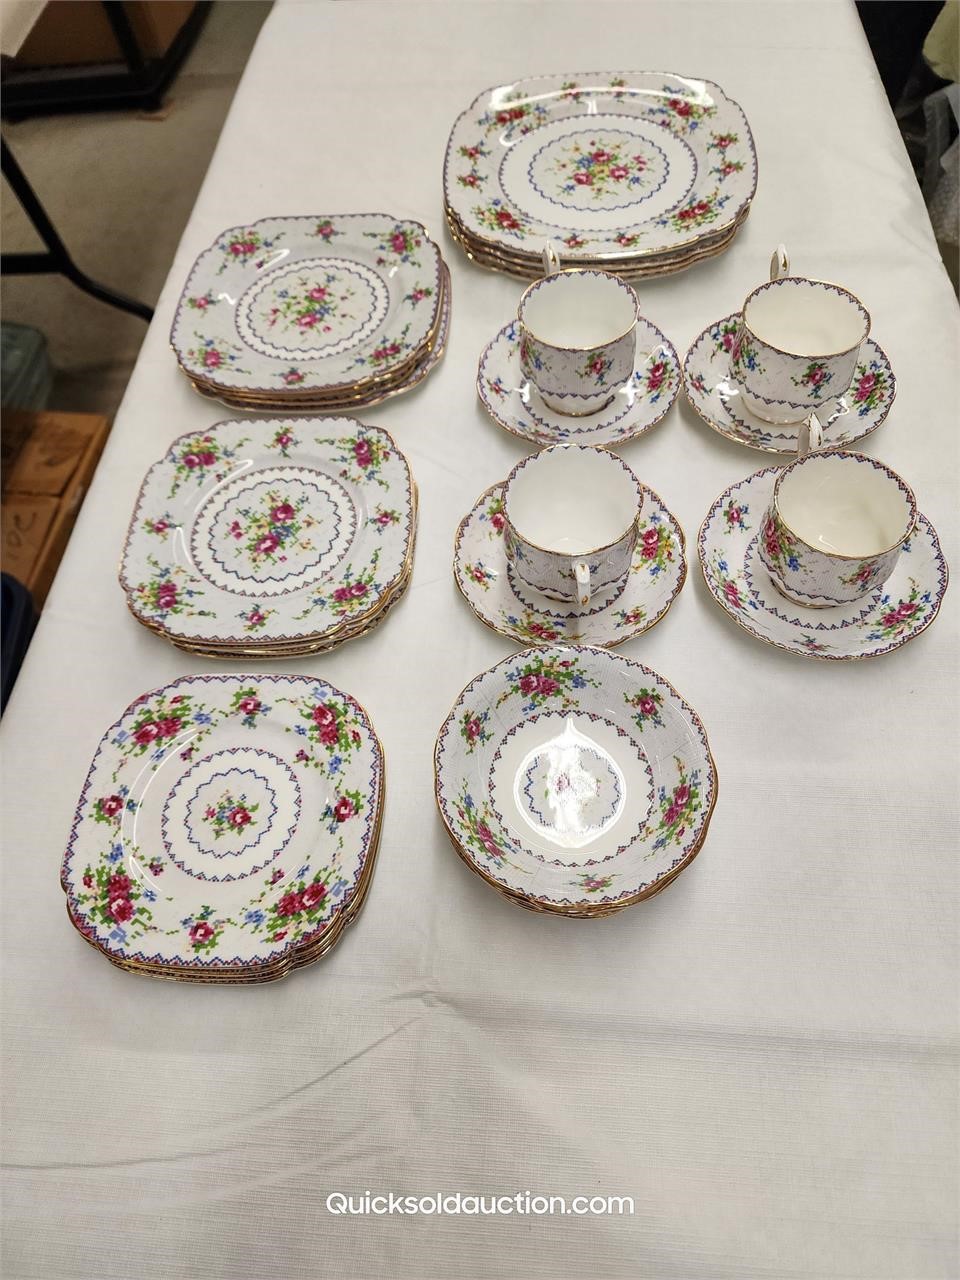 R.A. Petit Point 4 Place Settings Consists Of 28